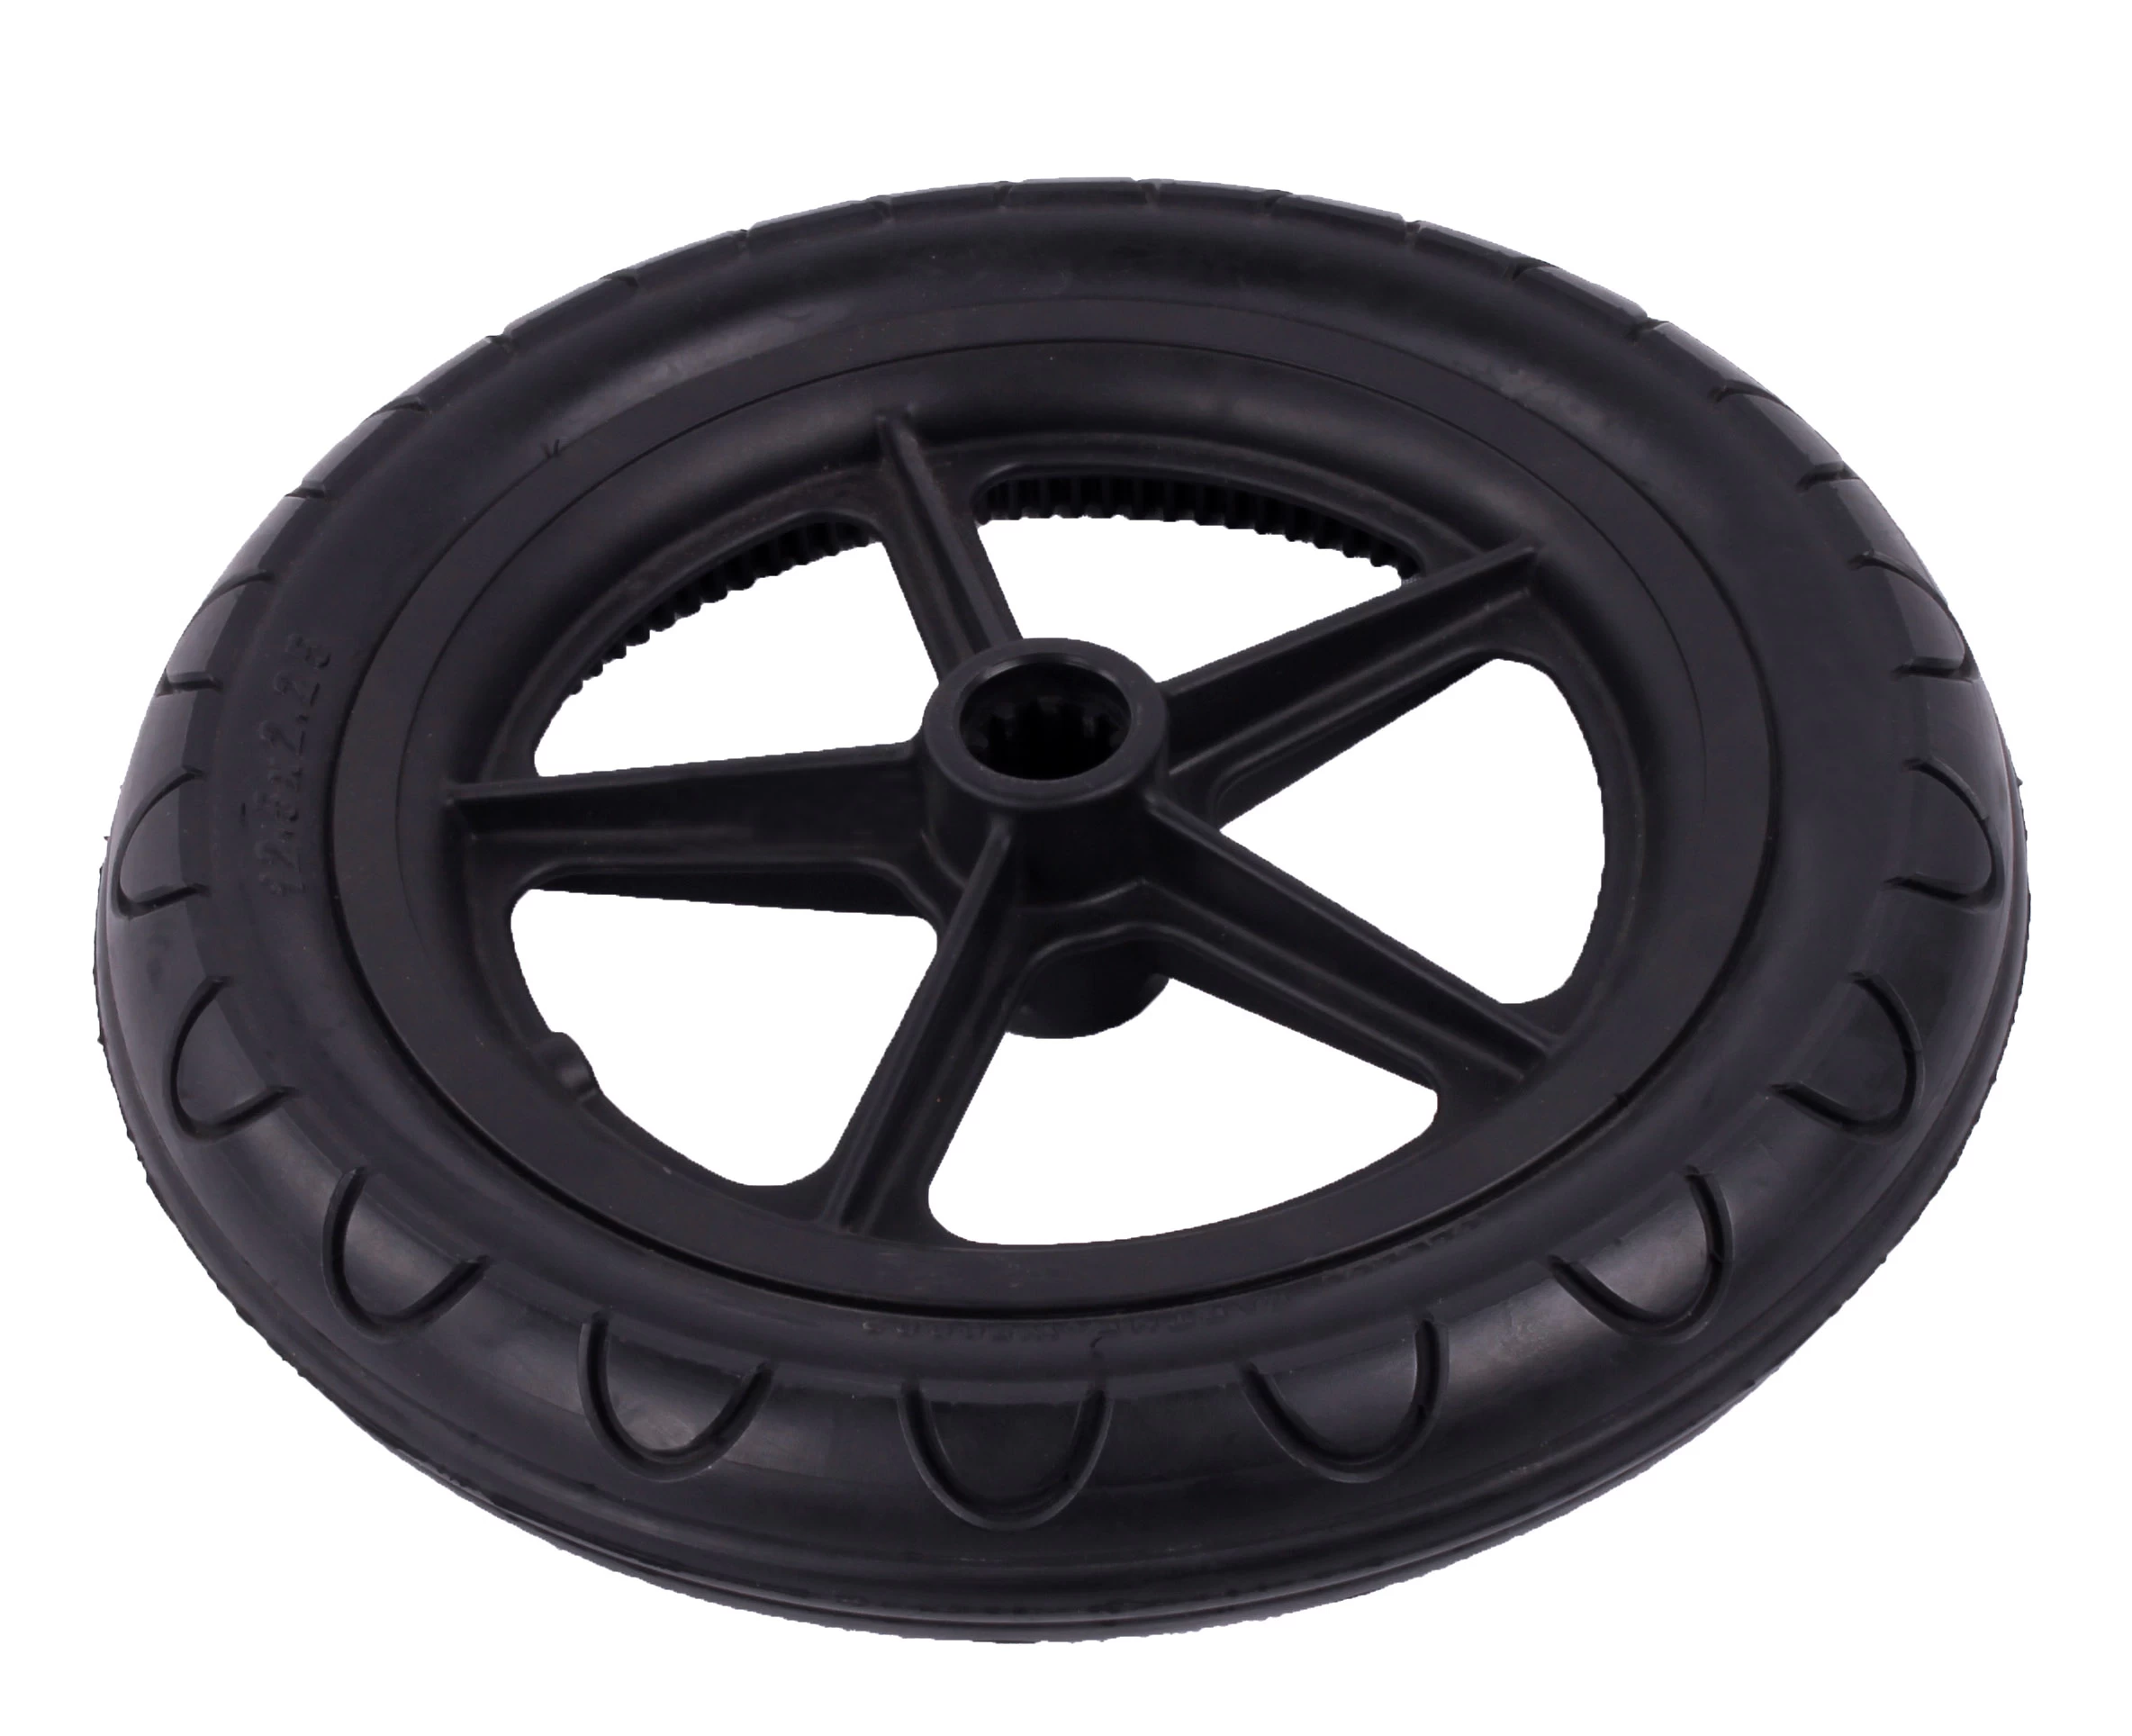 Polyurethane integral skin suppliers, china  polyurethane components manufacturers, pu solid tires